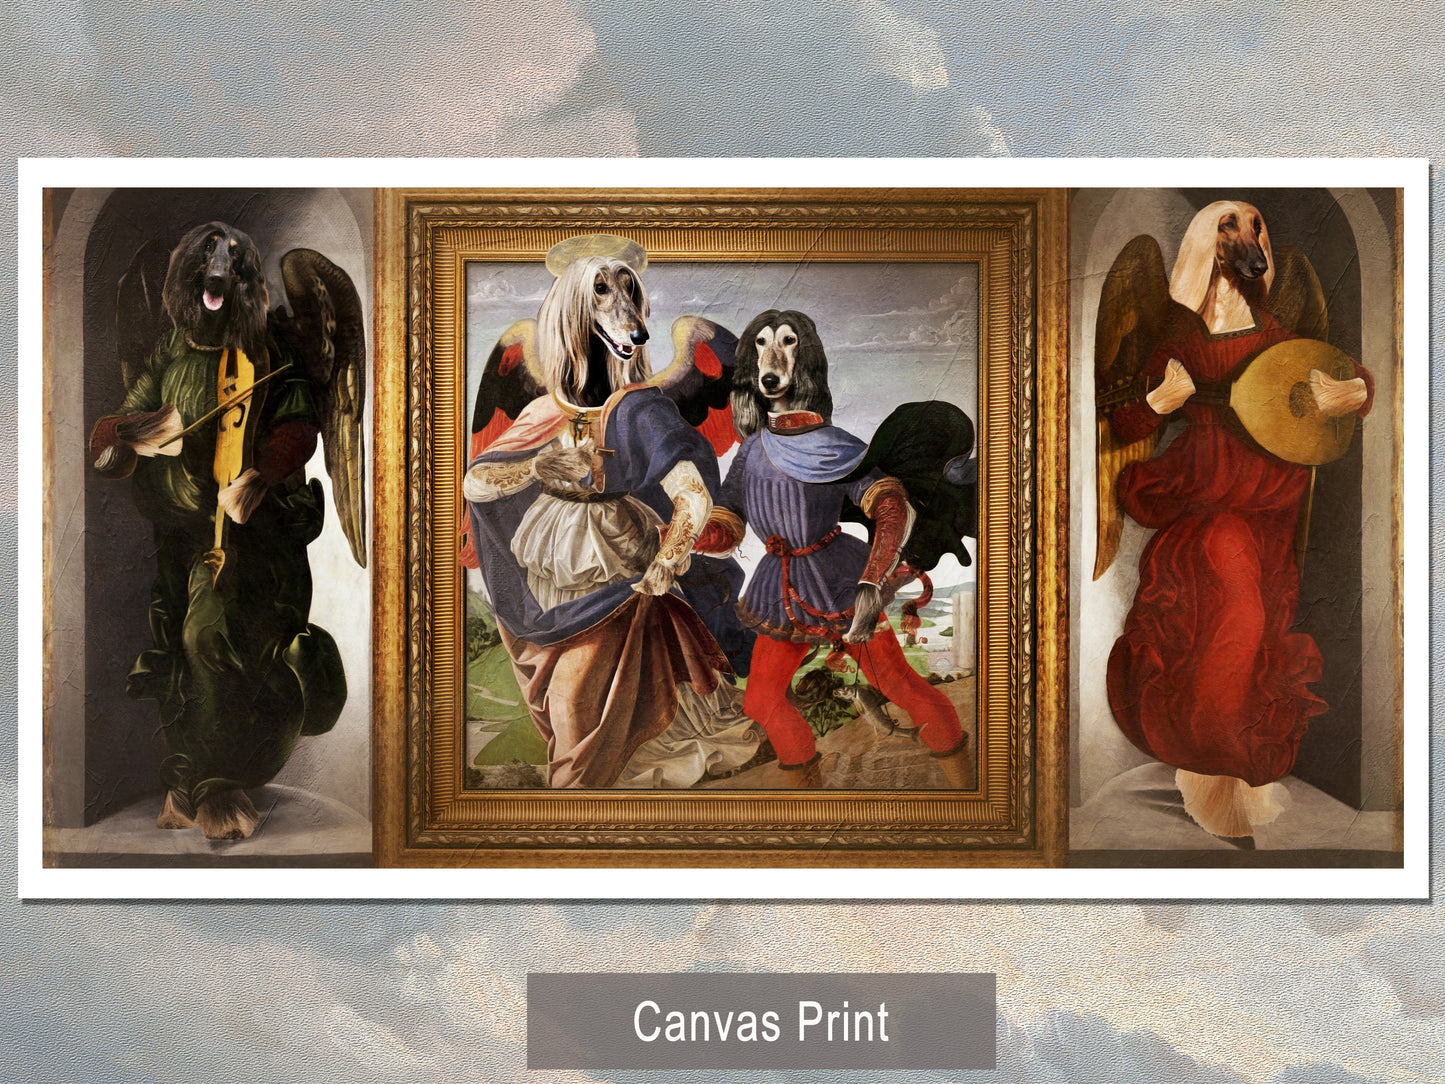 Afghan Hound Woof Hound Angels Triptych Portraits Renaissance Dog Painting